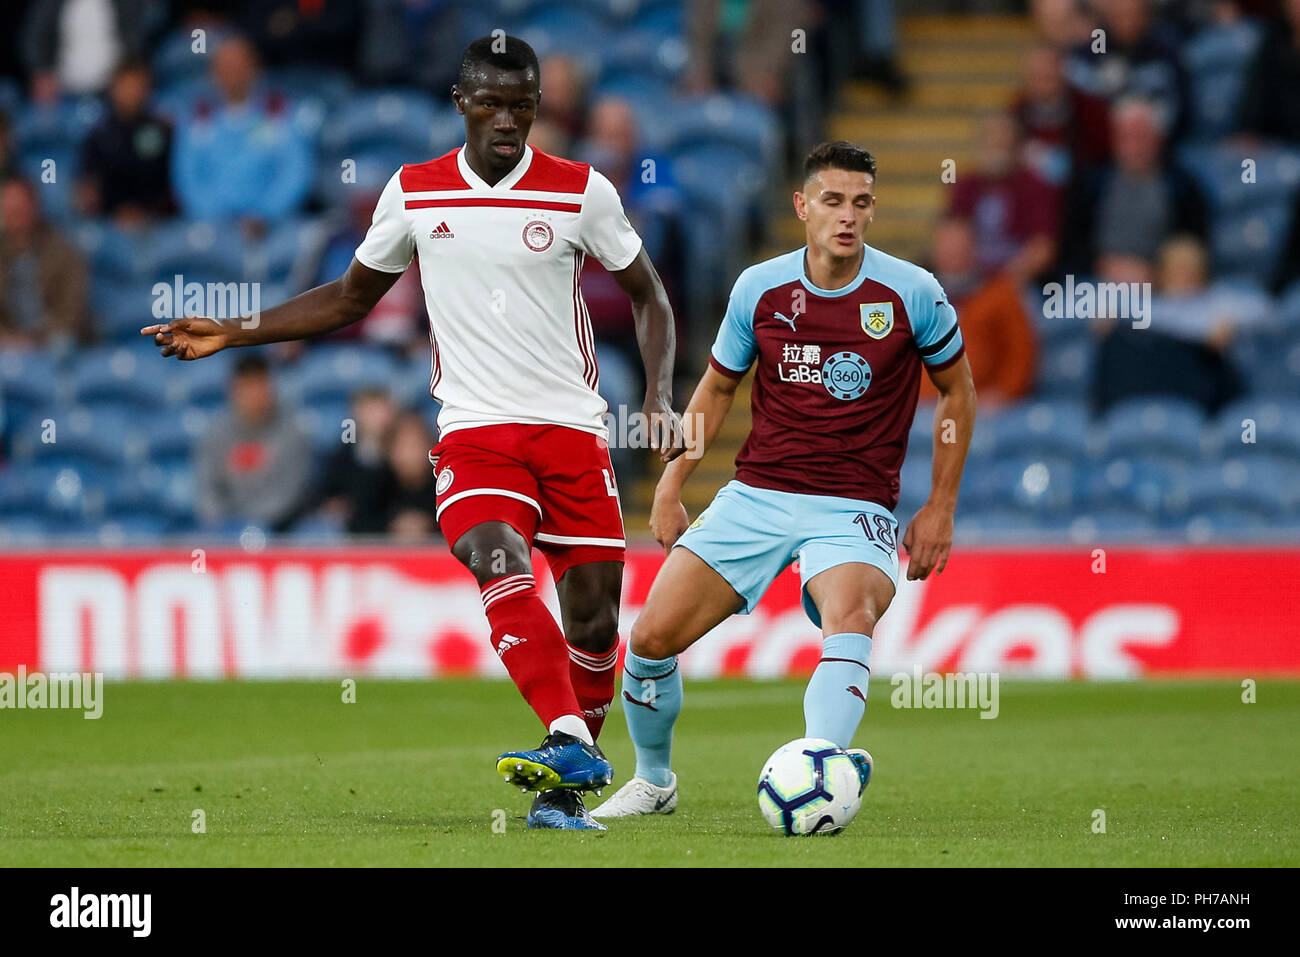 Burnley, UK. 30th August 2018. Mady Camara of Olympiakos and Ashley  Westwood of Burnley during the UEFA Europa League Play-Off Round second leg  match between Burnley and Olympiakos at Turf Moor on